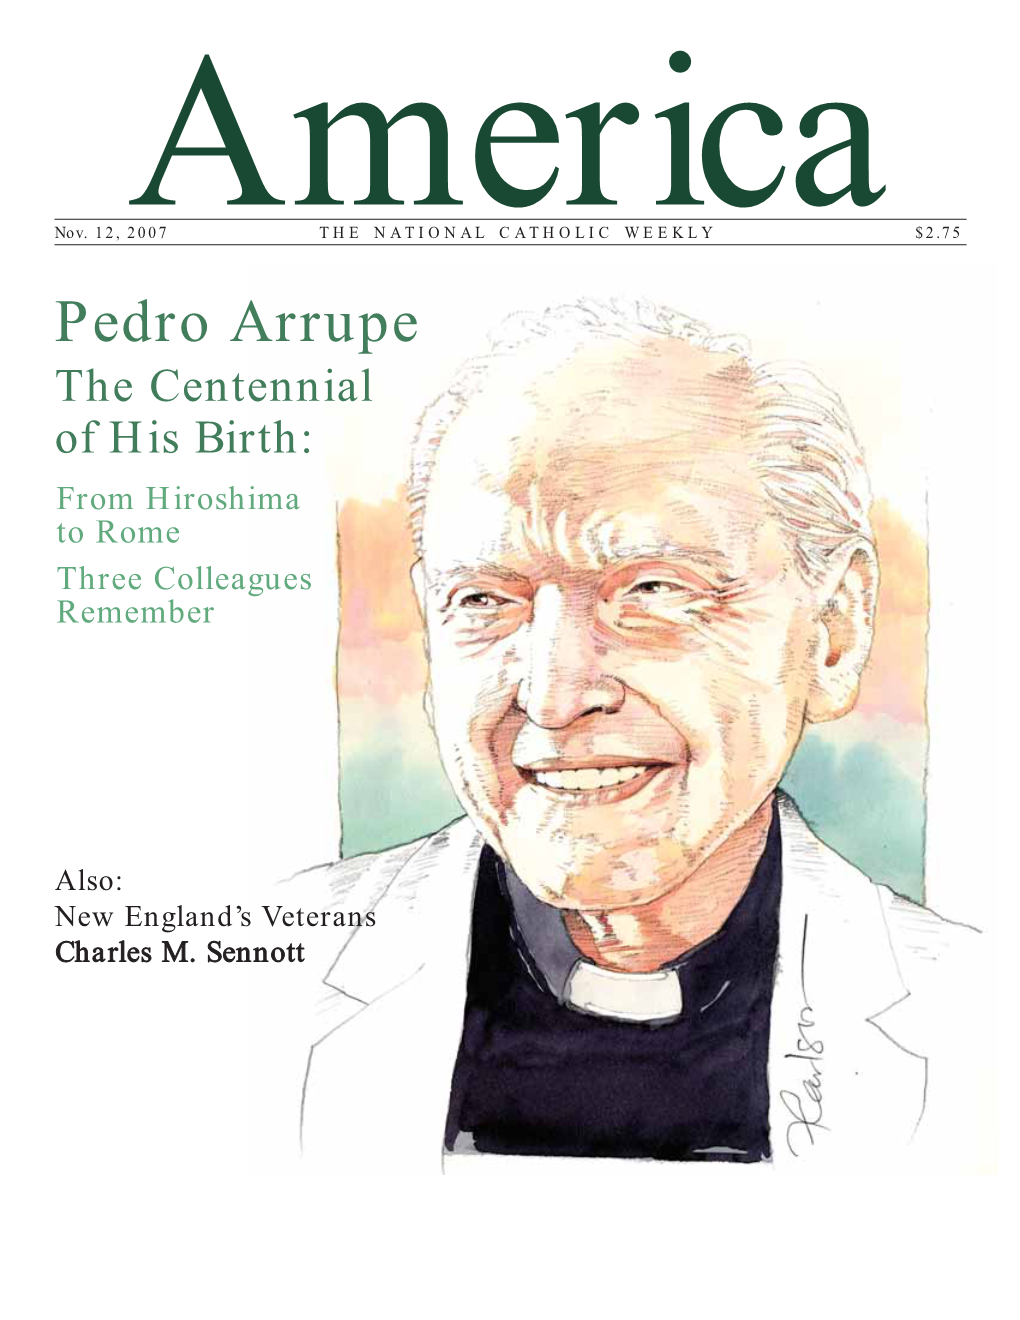 Pedro Arrupe the Centennial of His Birth: from Hiroshima to Rome Three Colleagues Remember